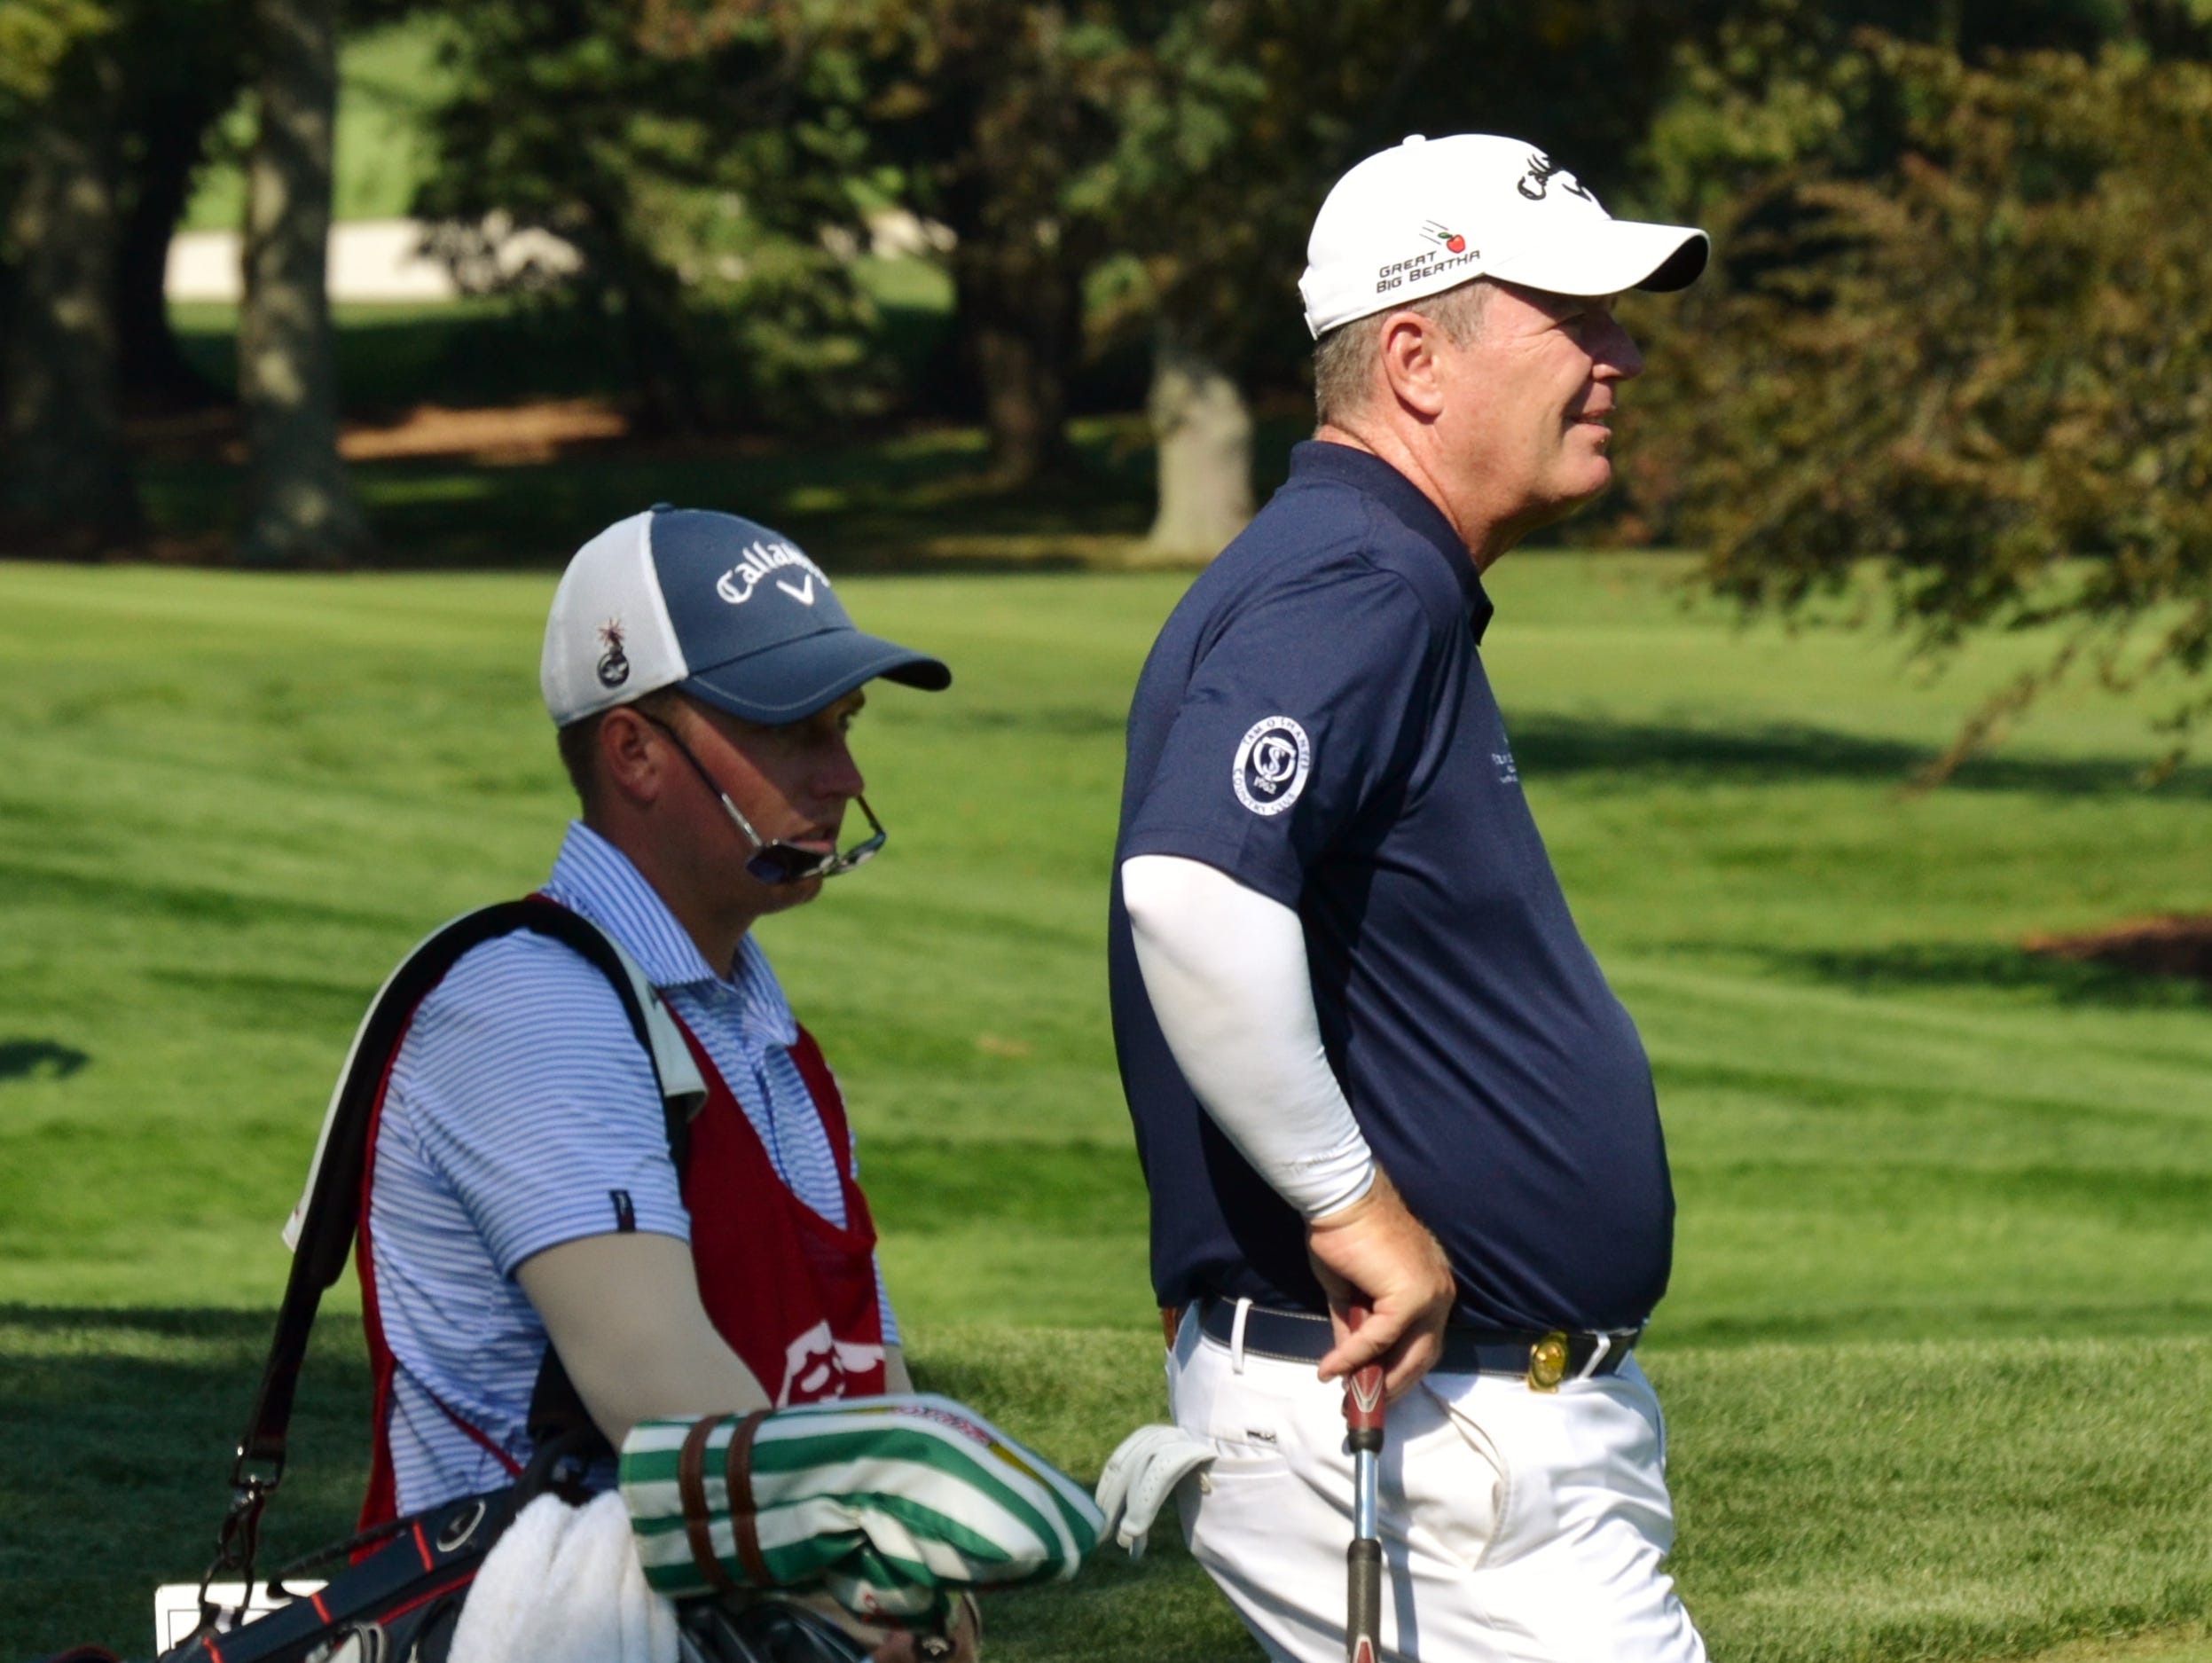 Met Open champion Mark Brown waits to tee off Wednesday at the 17th hole at Glen Oaks with caddie Josh Rackley. The Tam O'Shanter head pro also won the Met Open in 1999 and 2013.